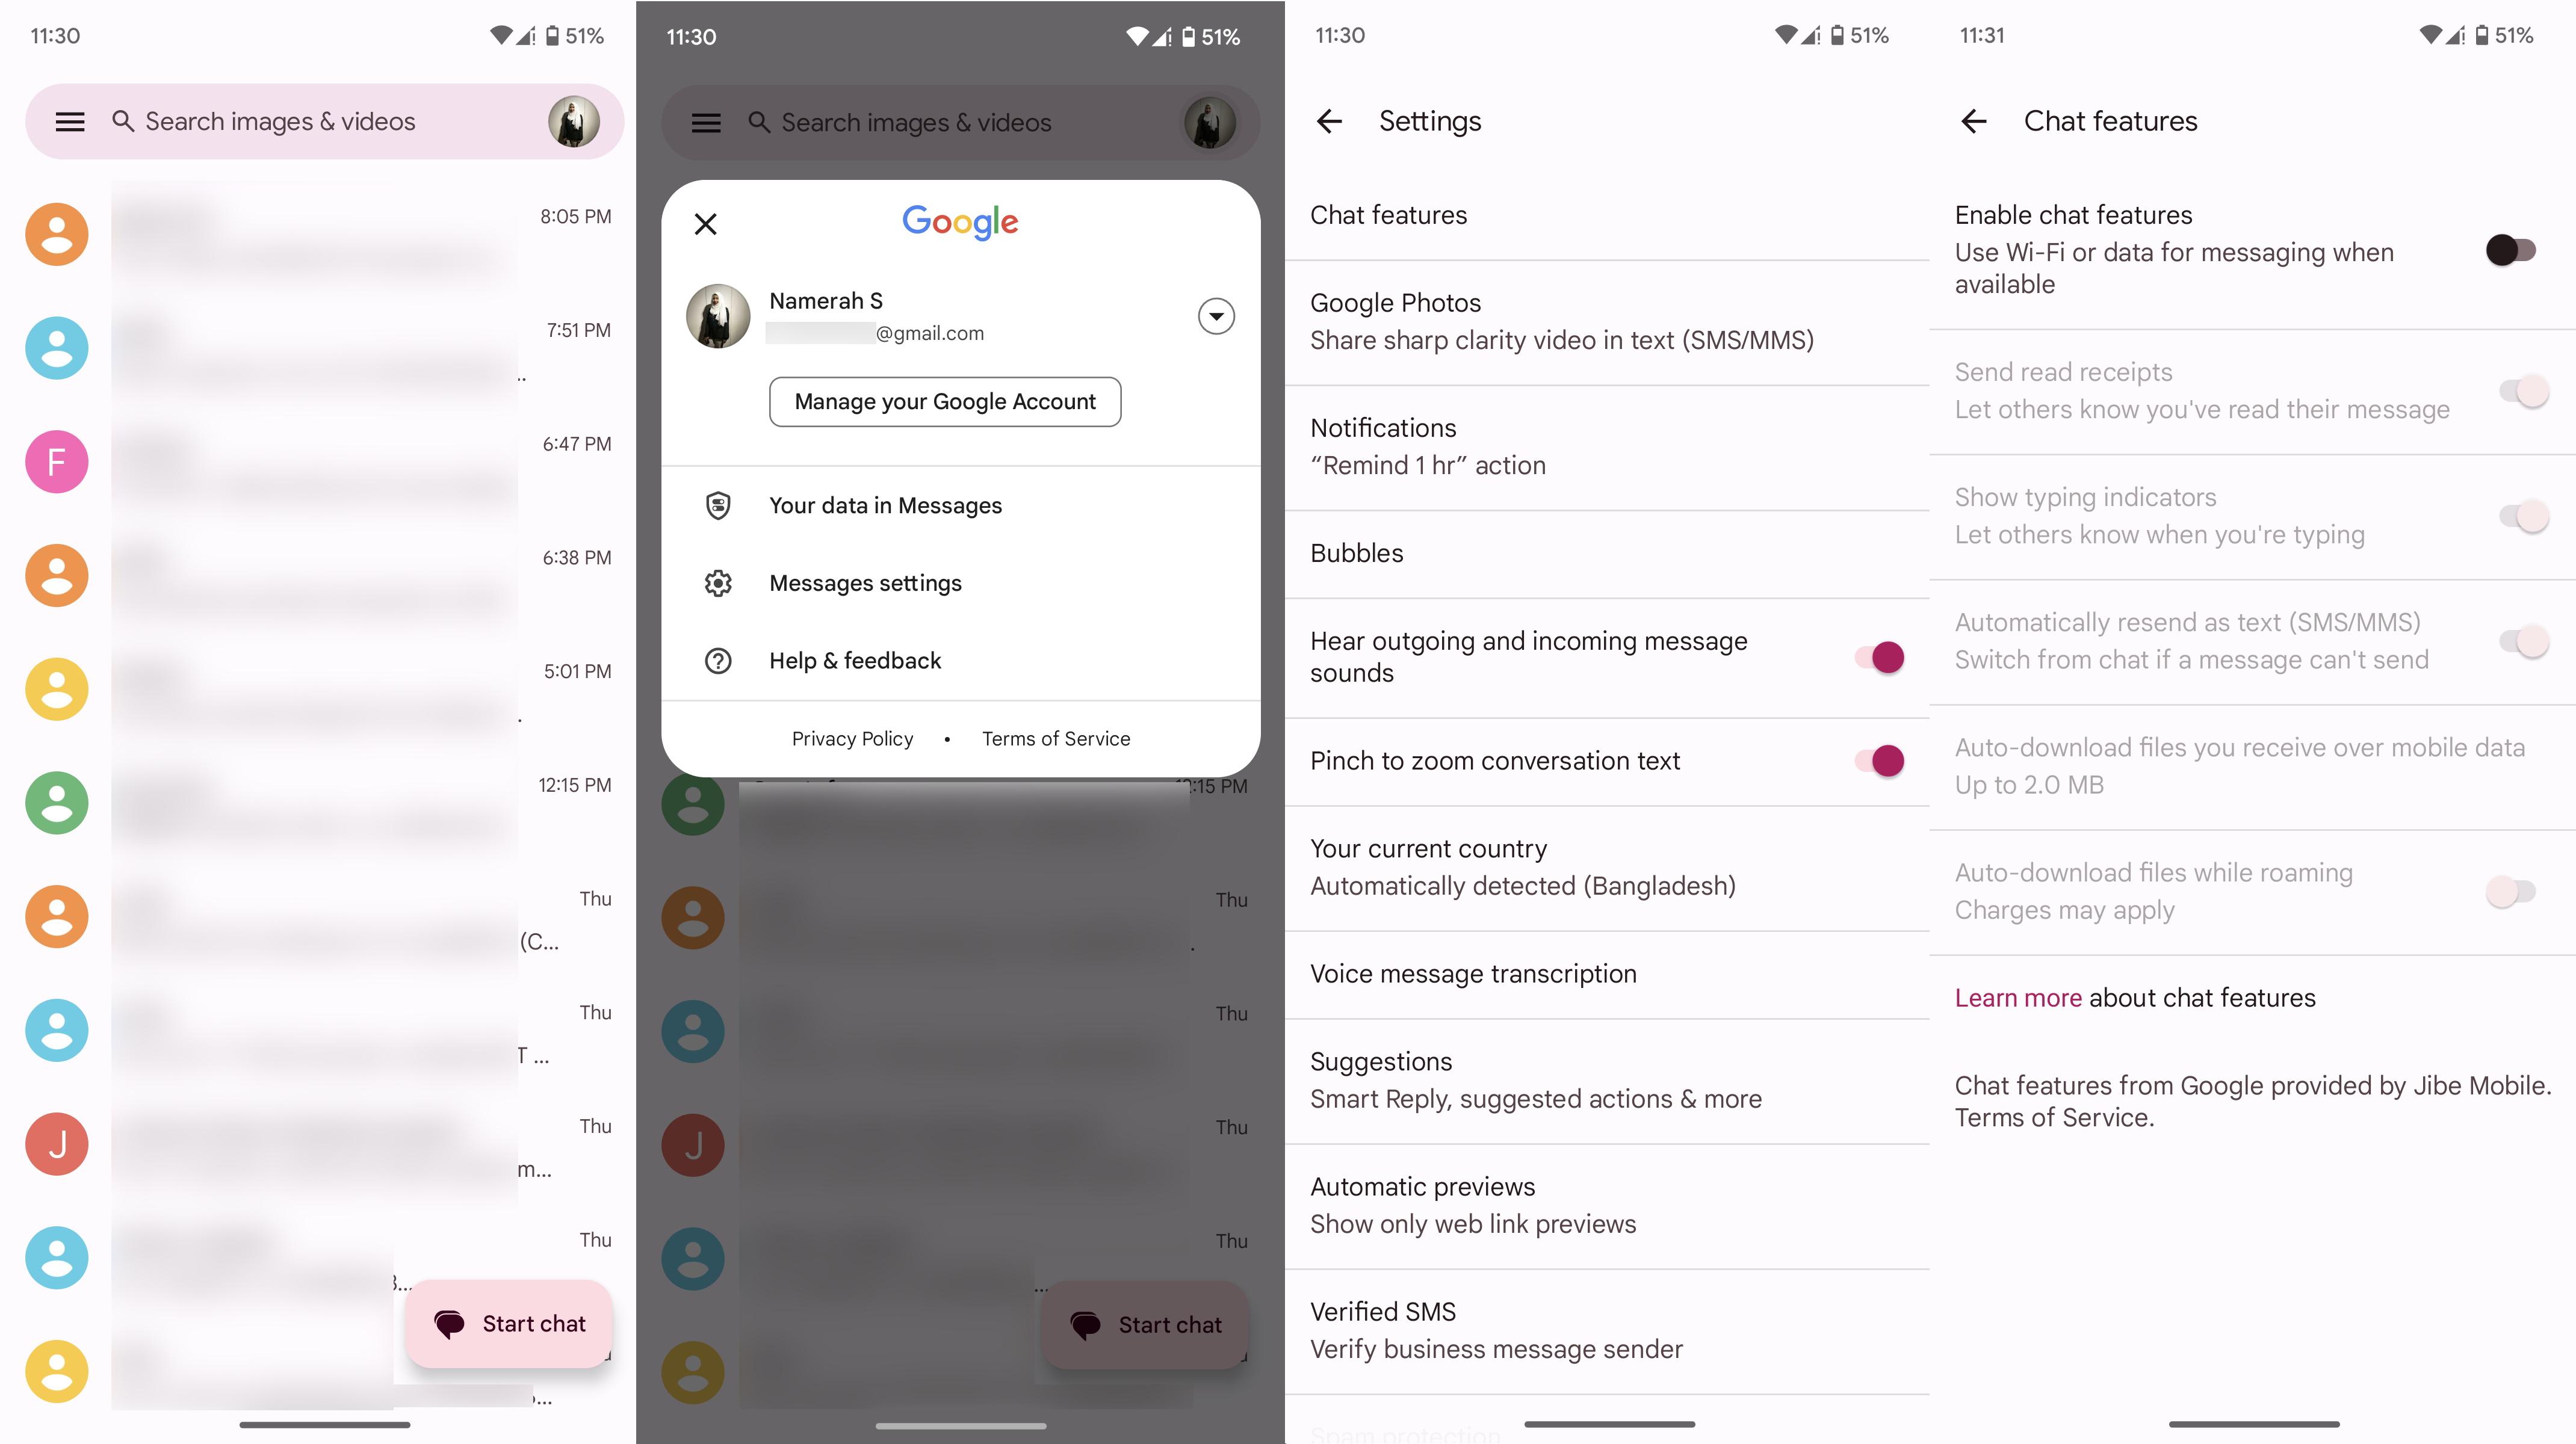 How to enable and use end-to-end encryption in Google Messages